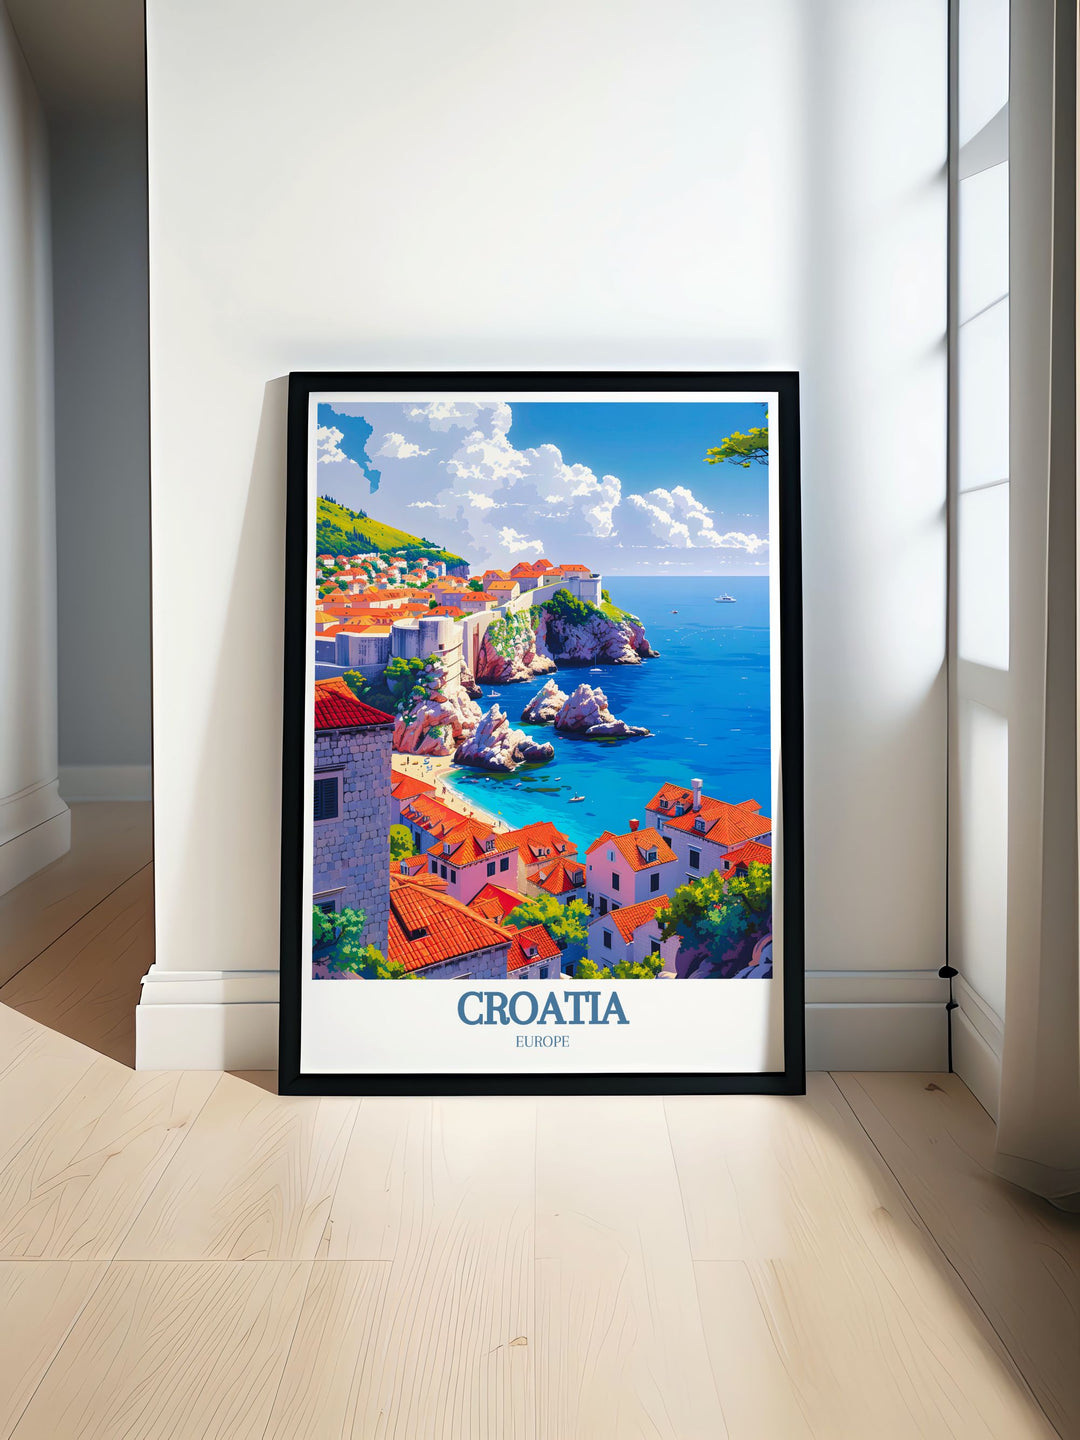 Featuring breathtaking views of Dubrovnik Old Town and the Adriatic Sea, this poster is perfect for those who wish to bring a piece of Croatias natural and historical splendor into their home.